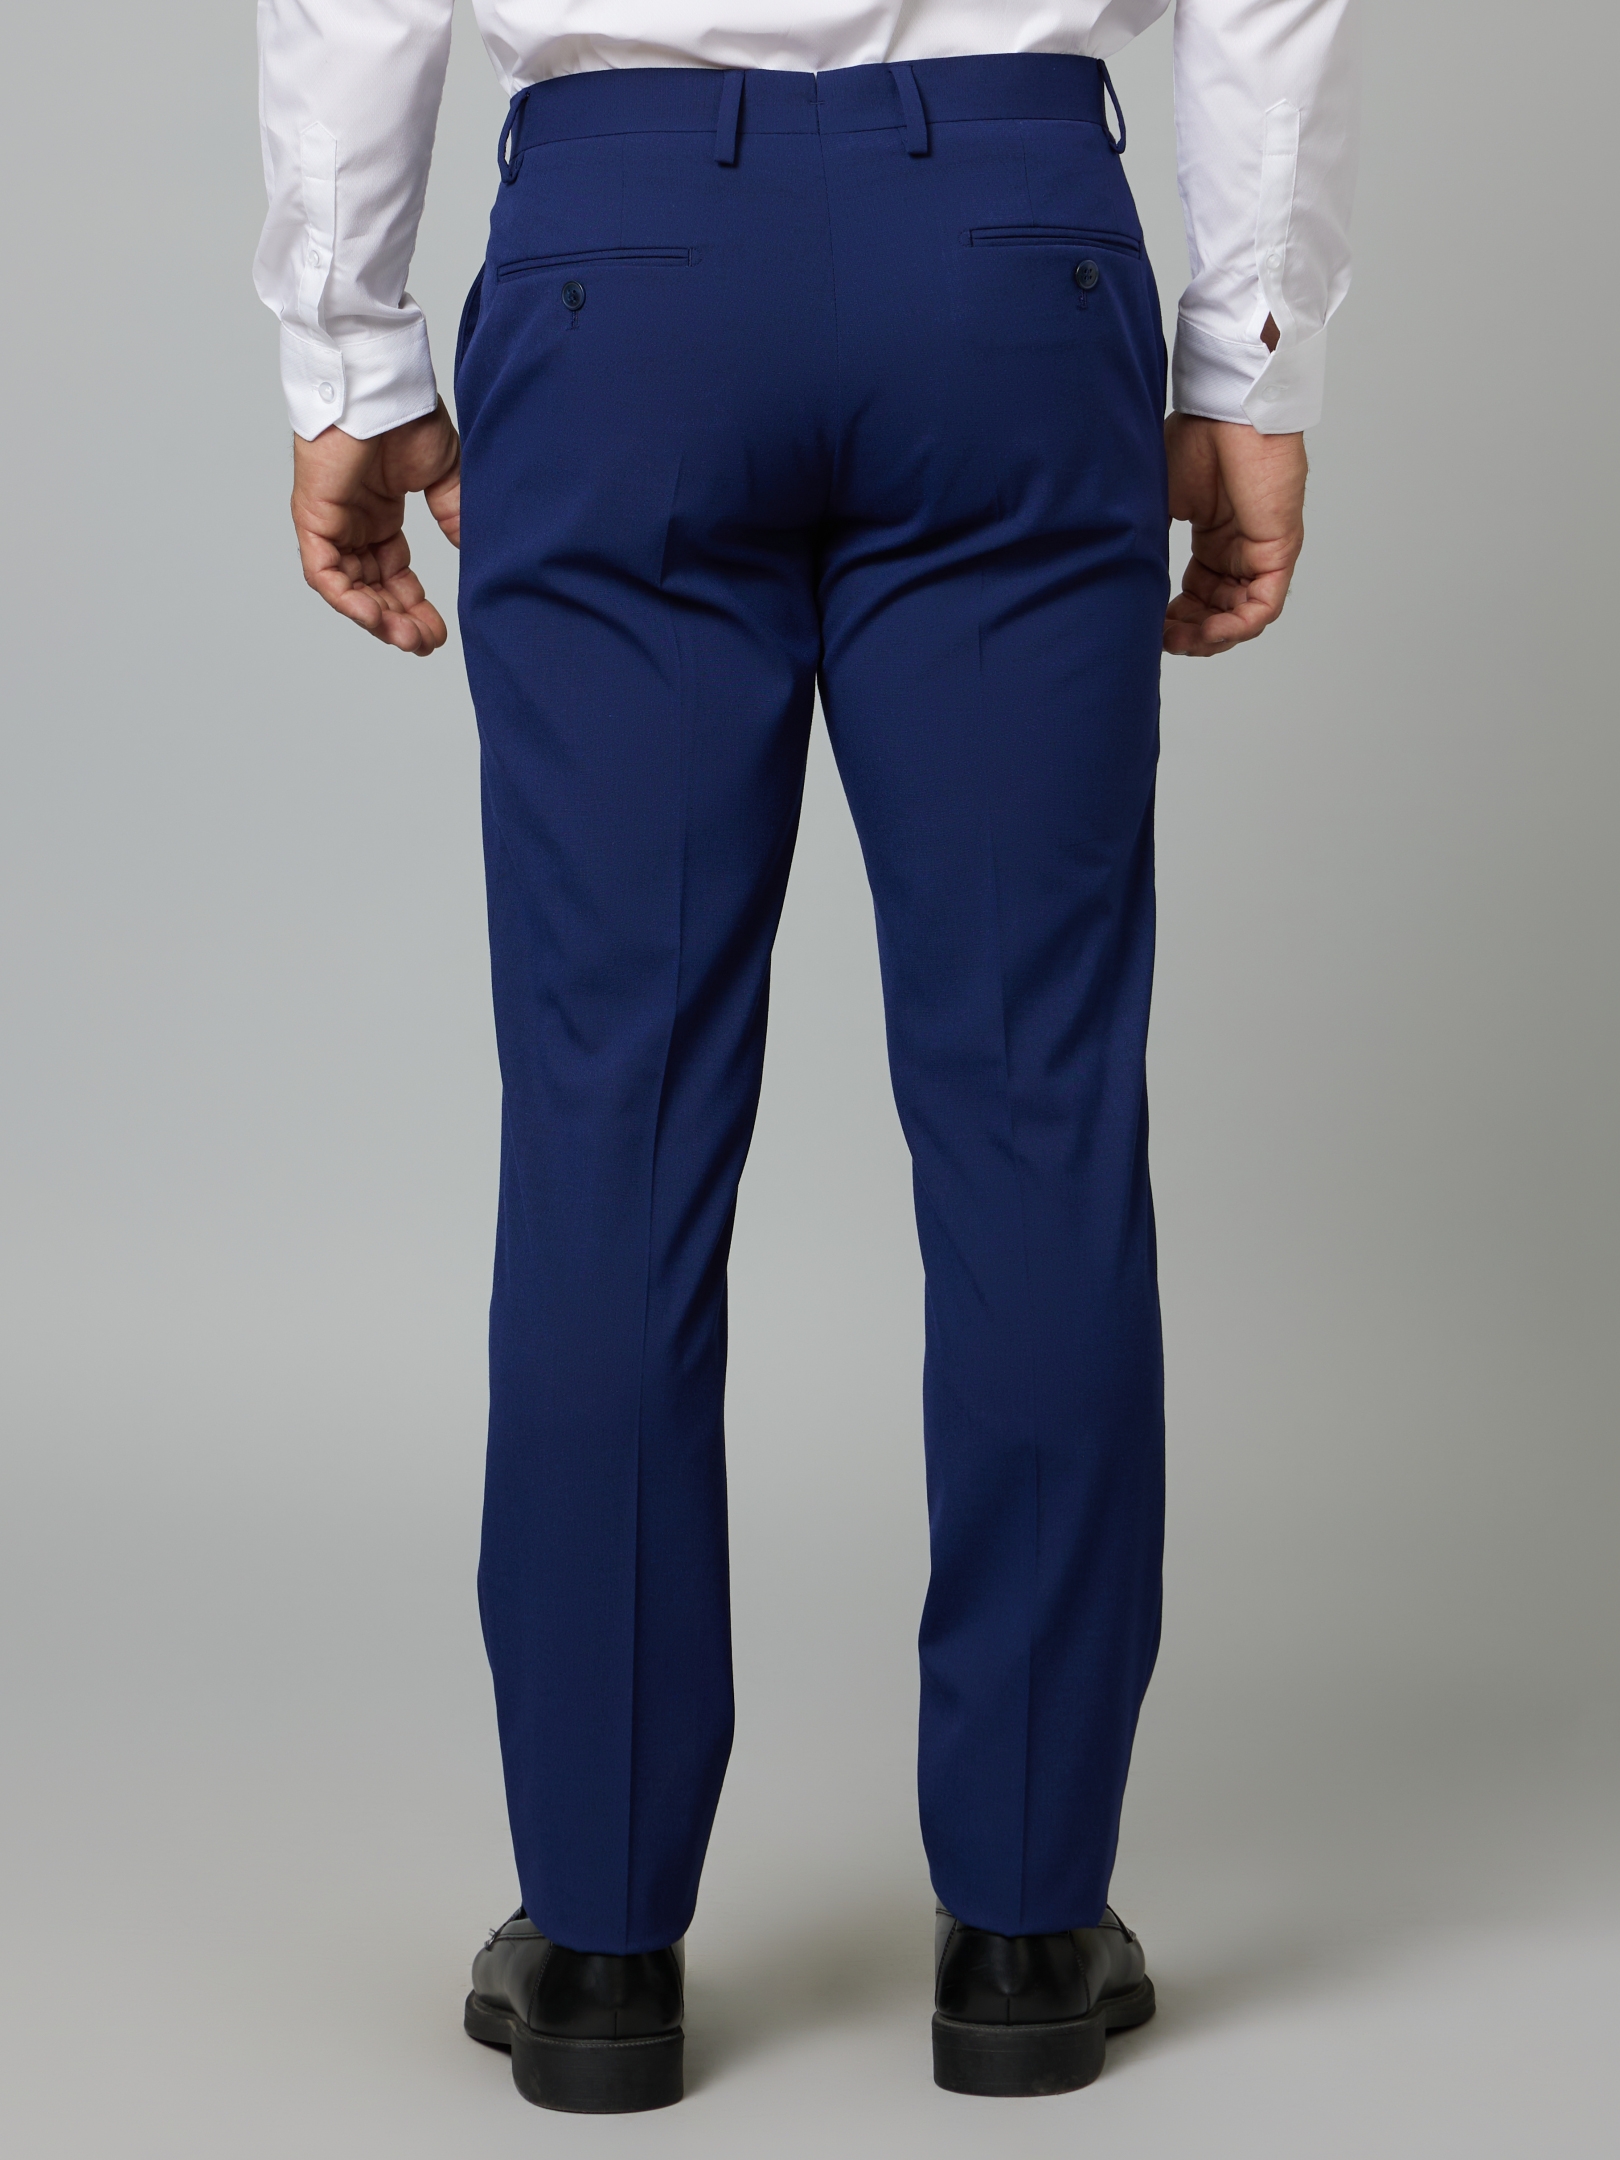 Men's Blue Polyester Solid Formal Trousers